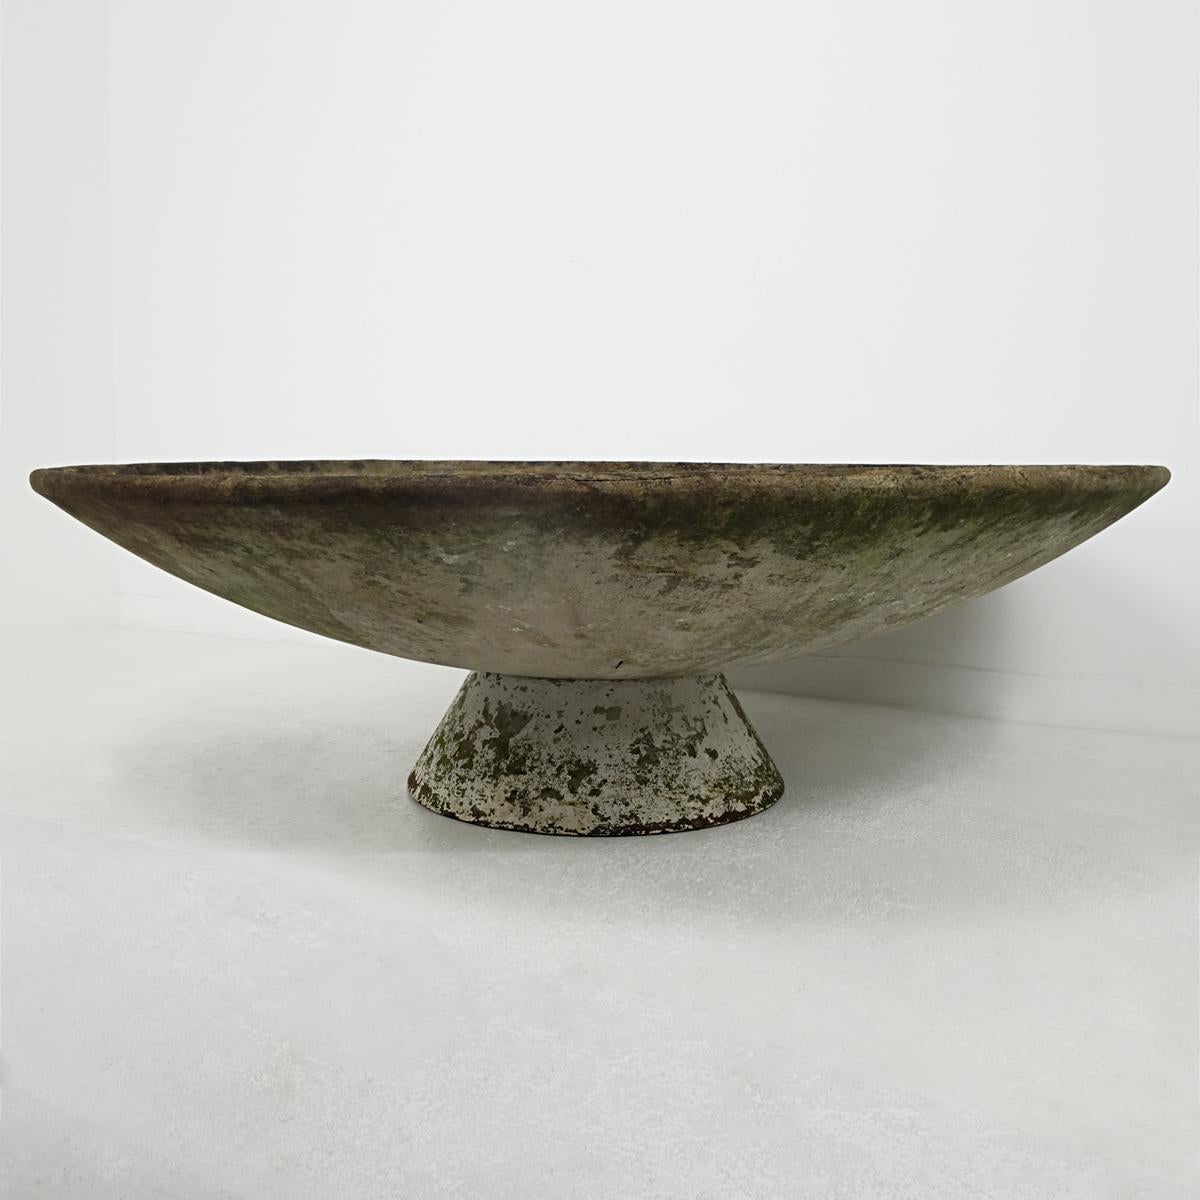 This planter designed by Swiss architect Willy Guhl and manufacturer by Eternit truly is a statement piece with its diameter of nearly 60 inches (150 cm). It has great patina as well

It sits on an independent stand allowing it for a horizontal